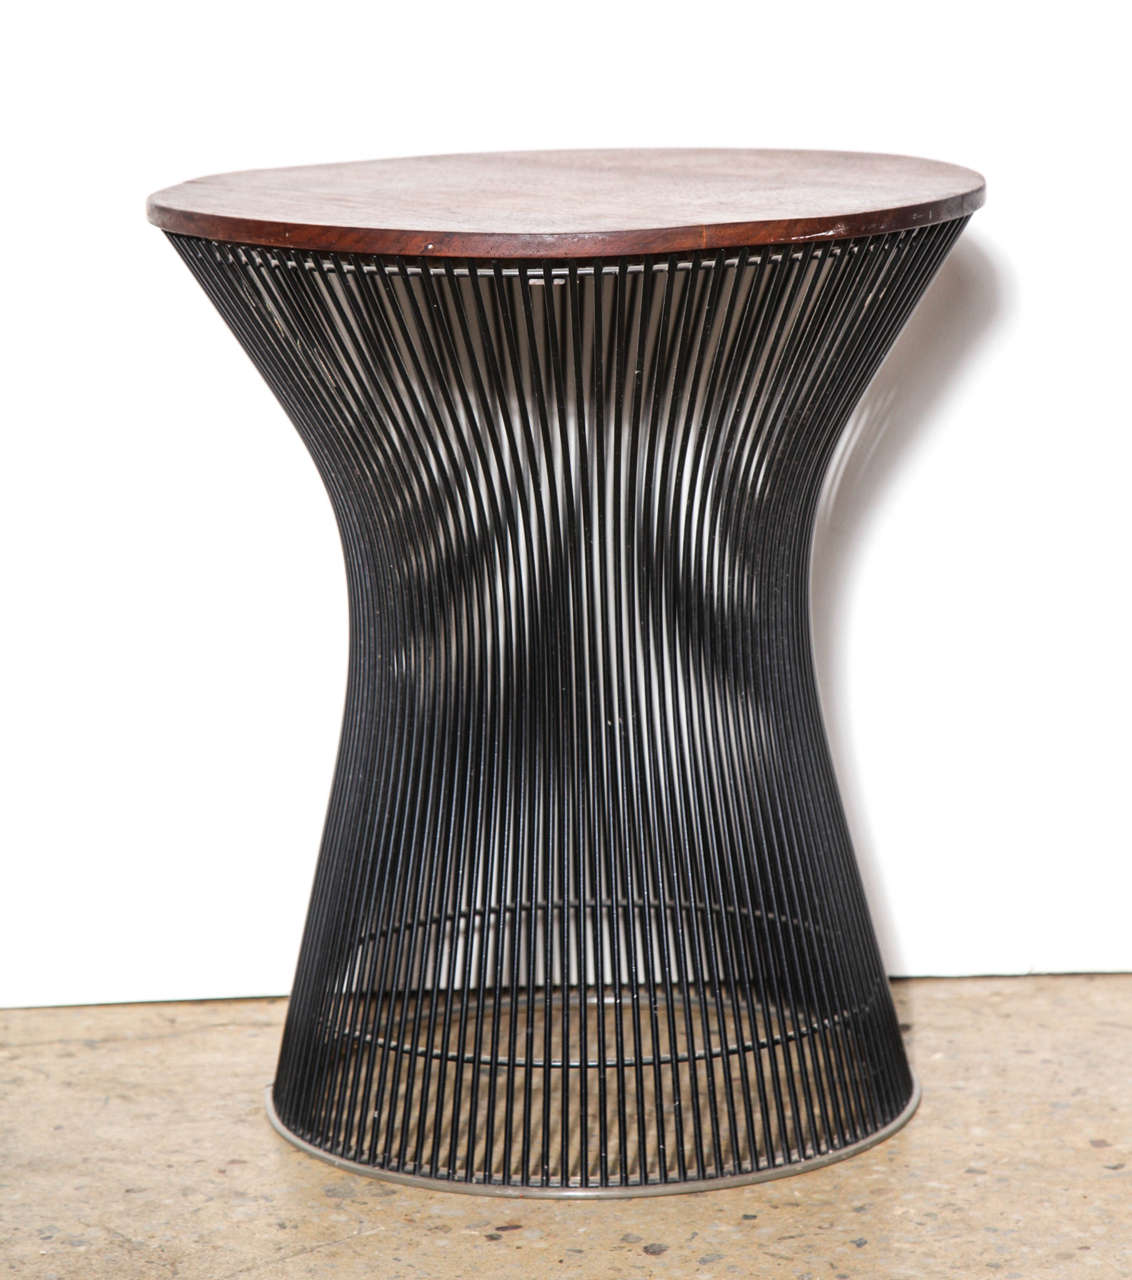 classic 1960's Warren Platner for Knoll Side Table or End Table with Black enameled Steel hour glass base (base diameter 13